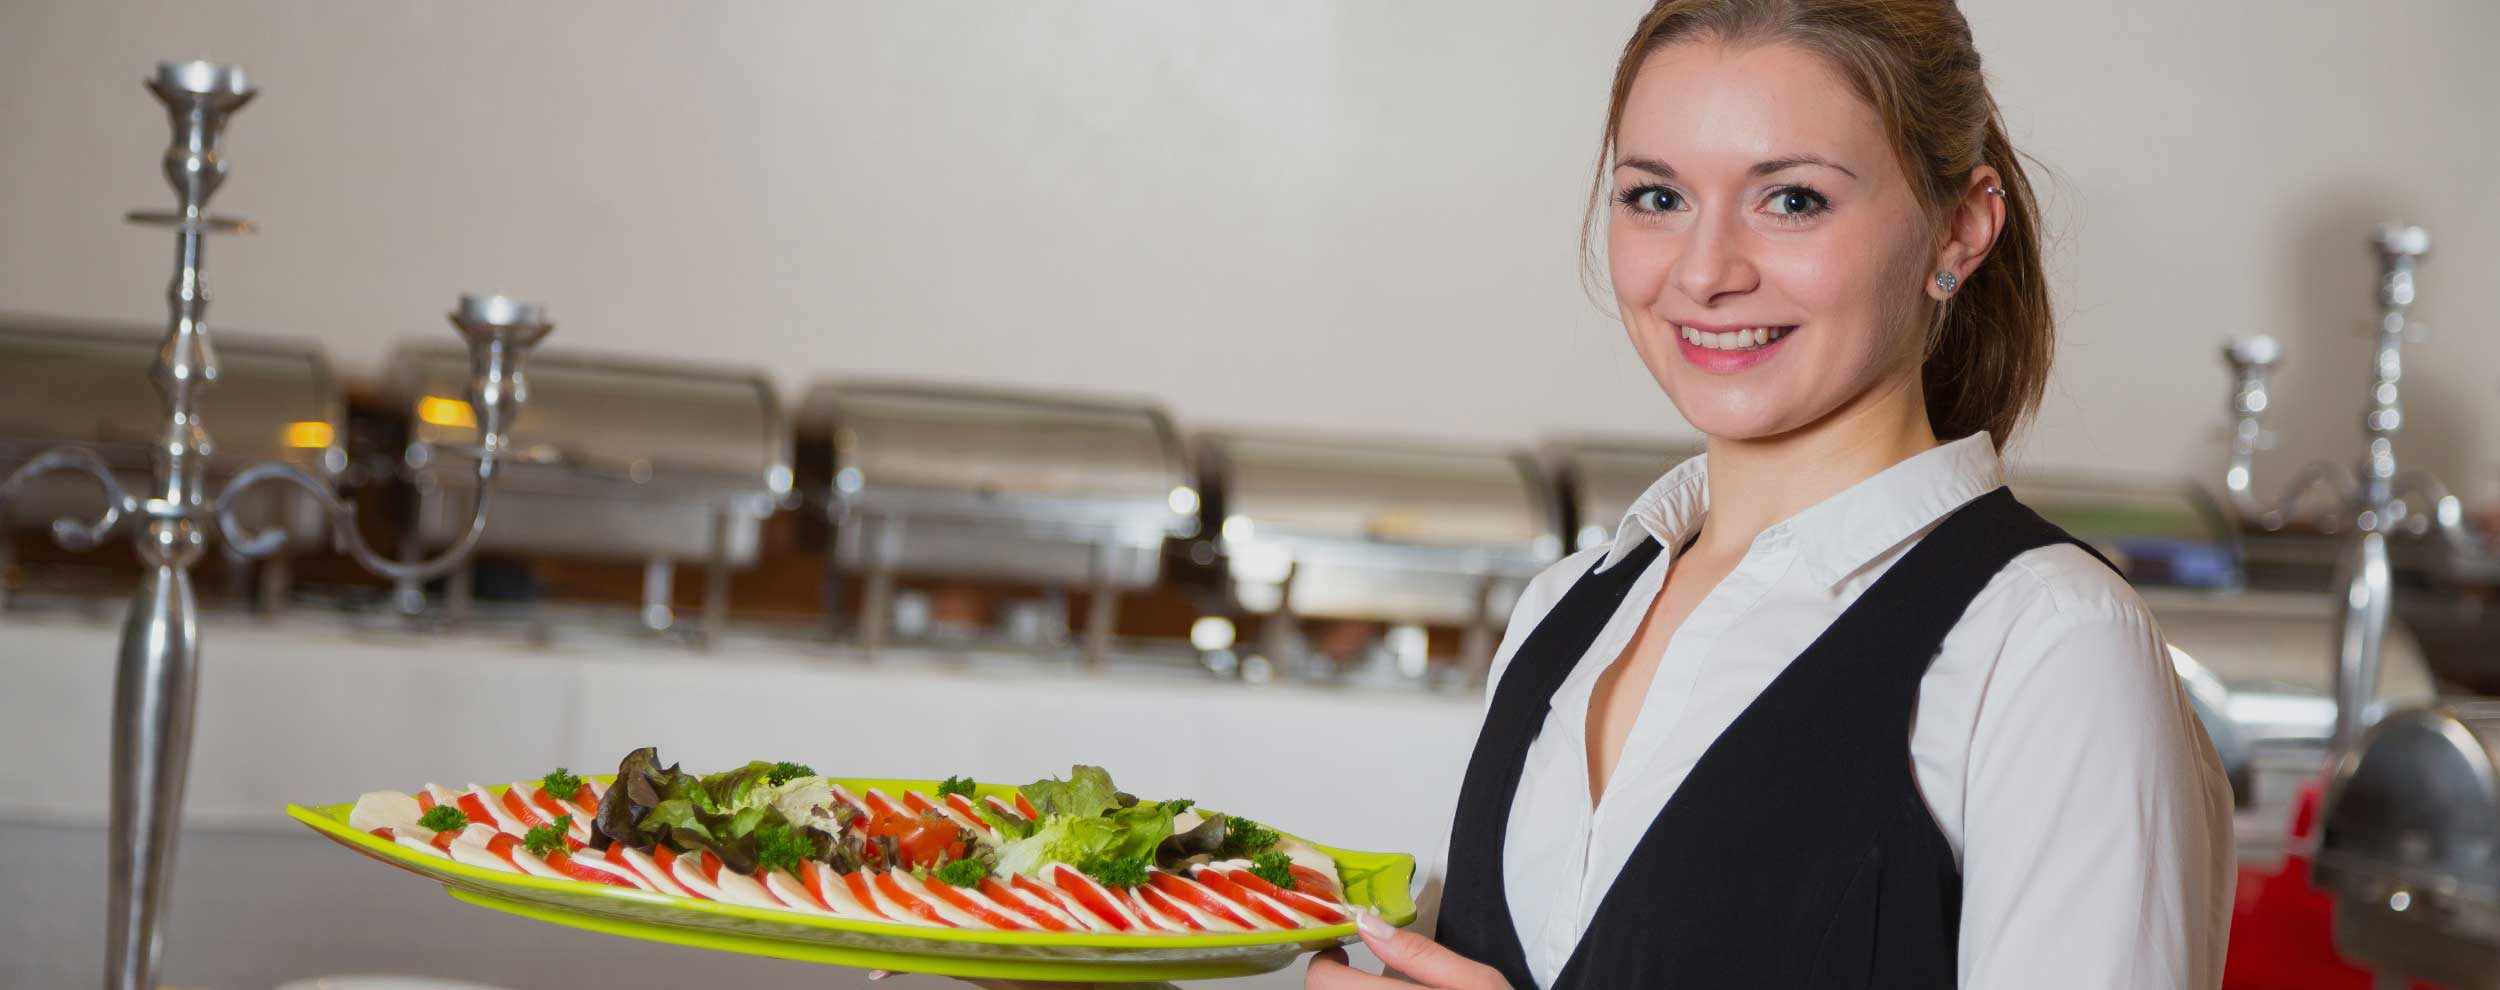 Do you have a catering or party service?